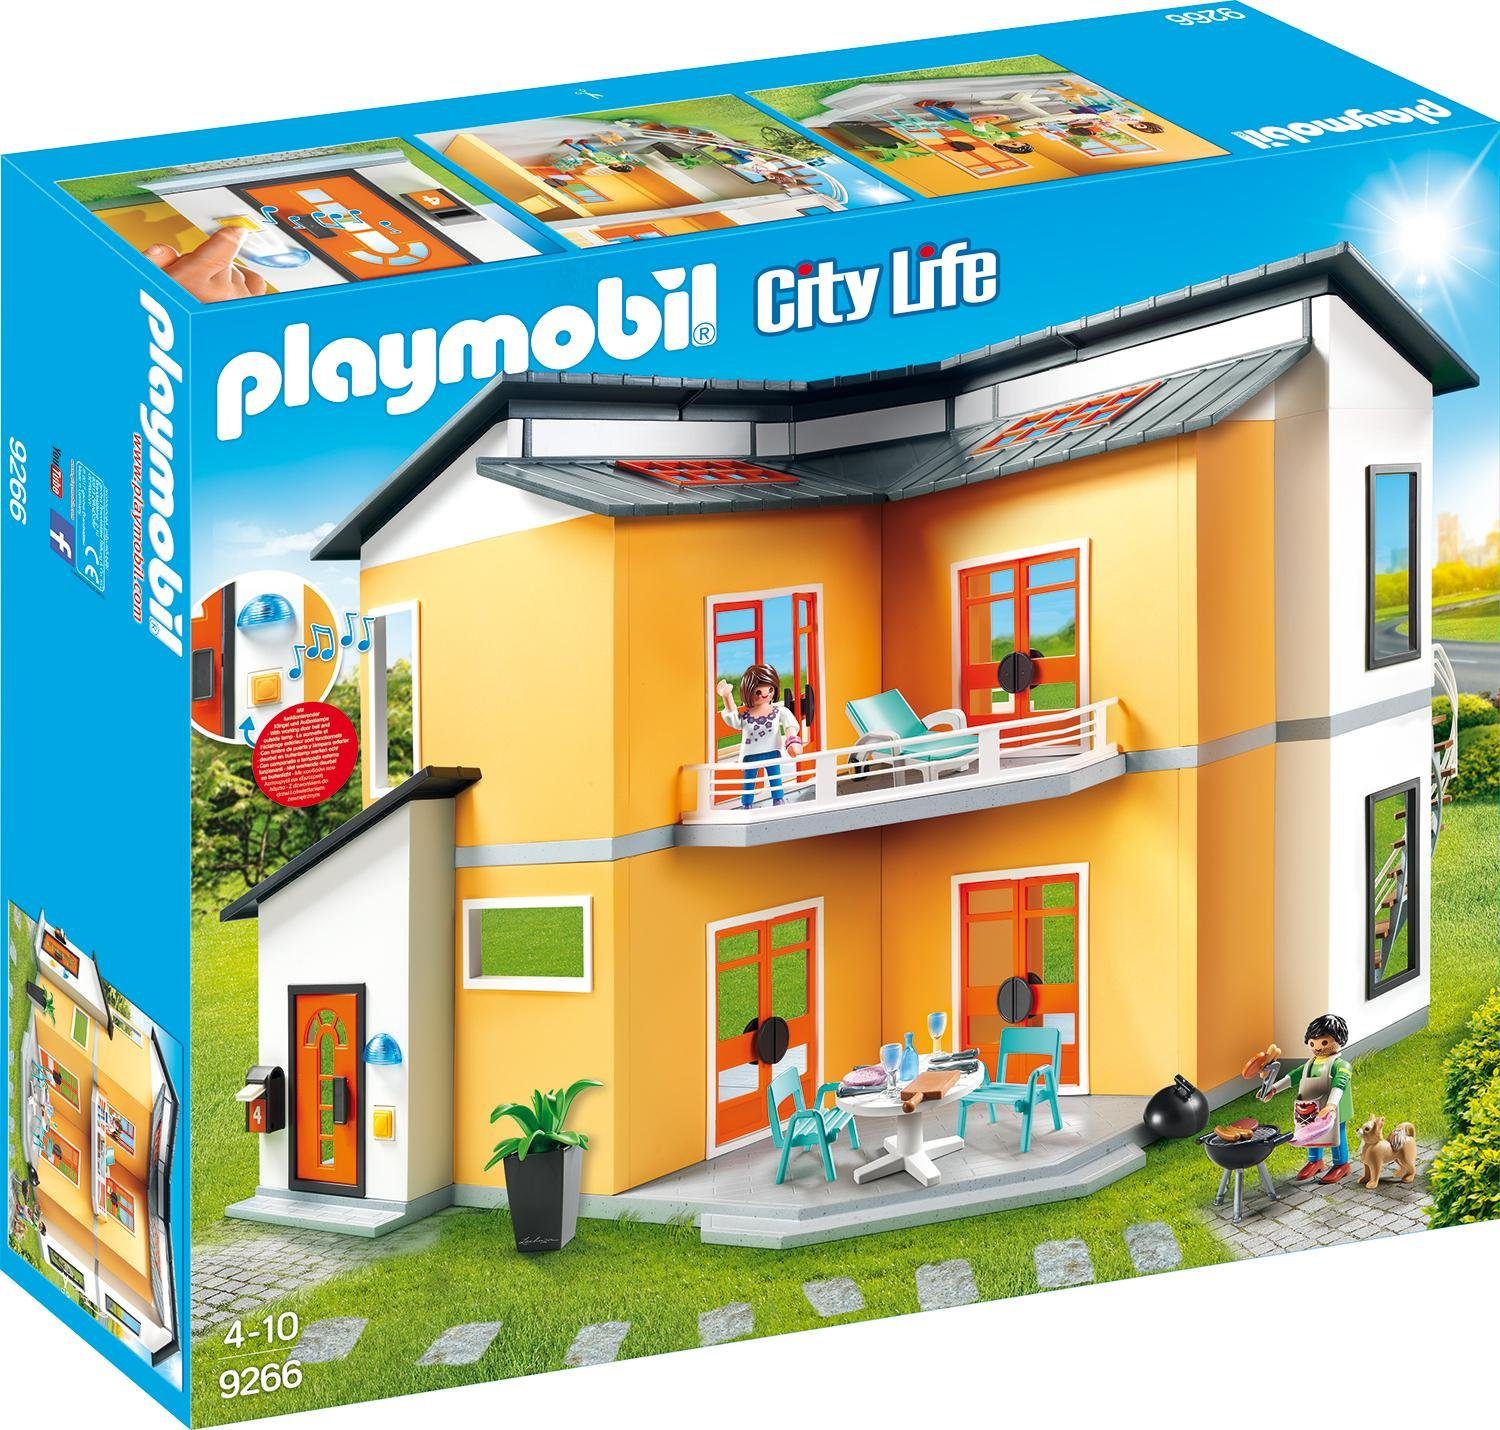 Playmobil® Konstruktions-Spielset Modernes Wohnhaus (9266), City Life, Made in Germany